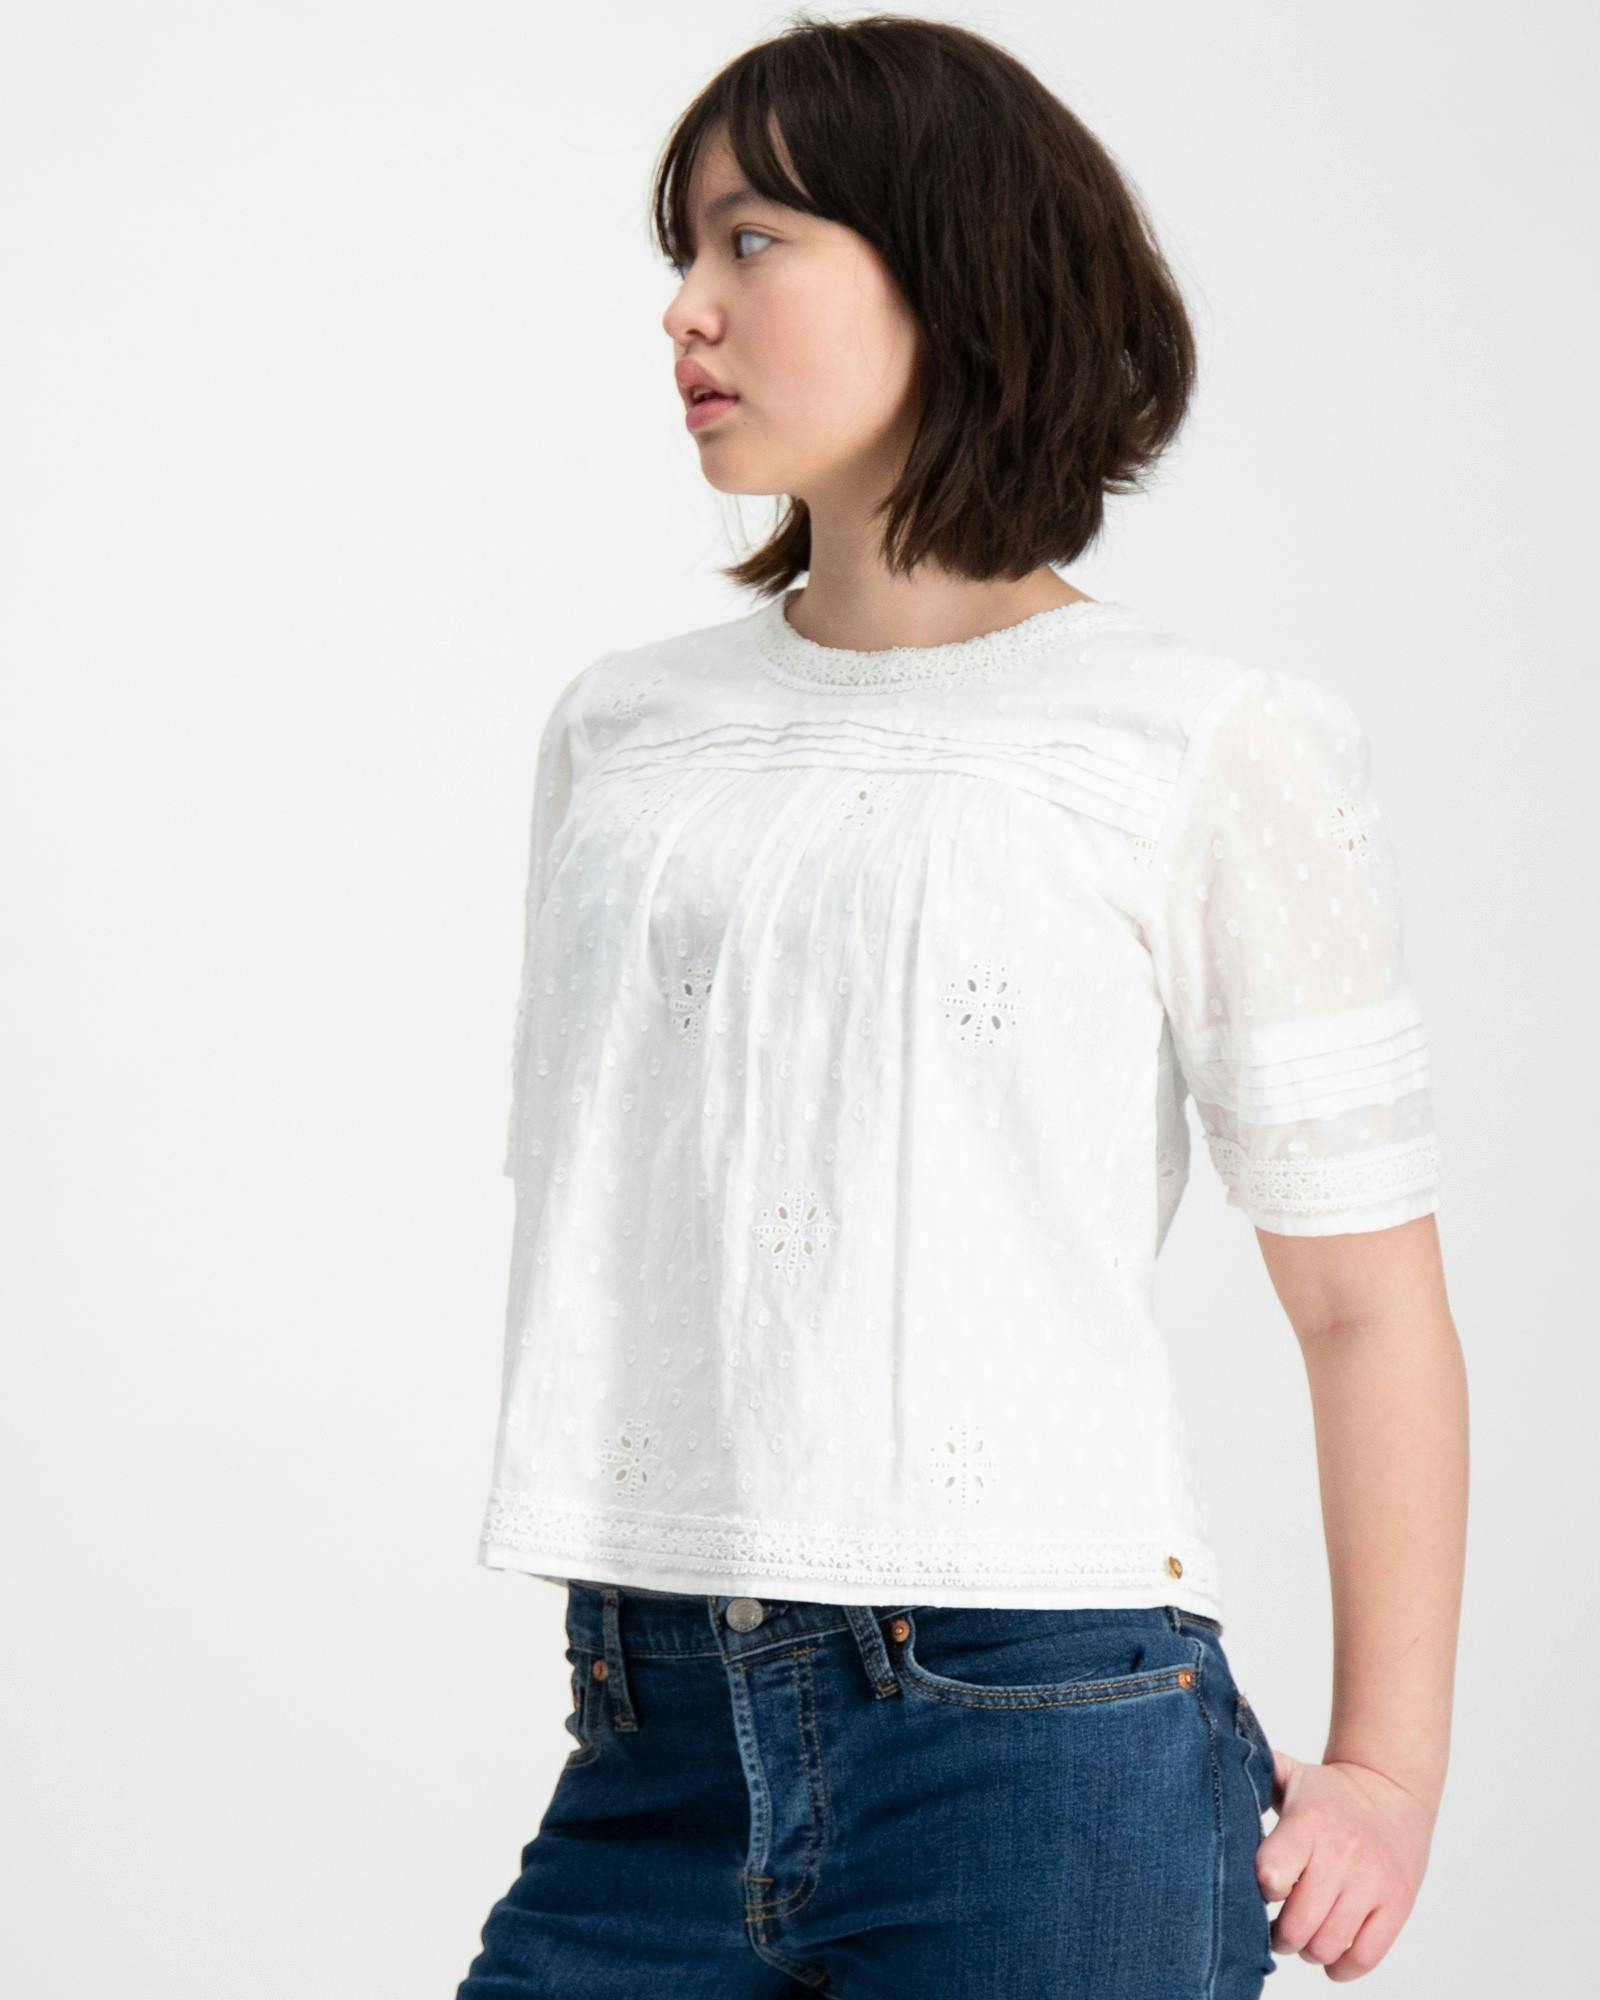 Broderie angaise & clip jacquard top